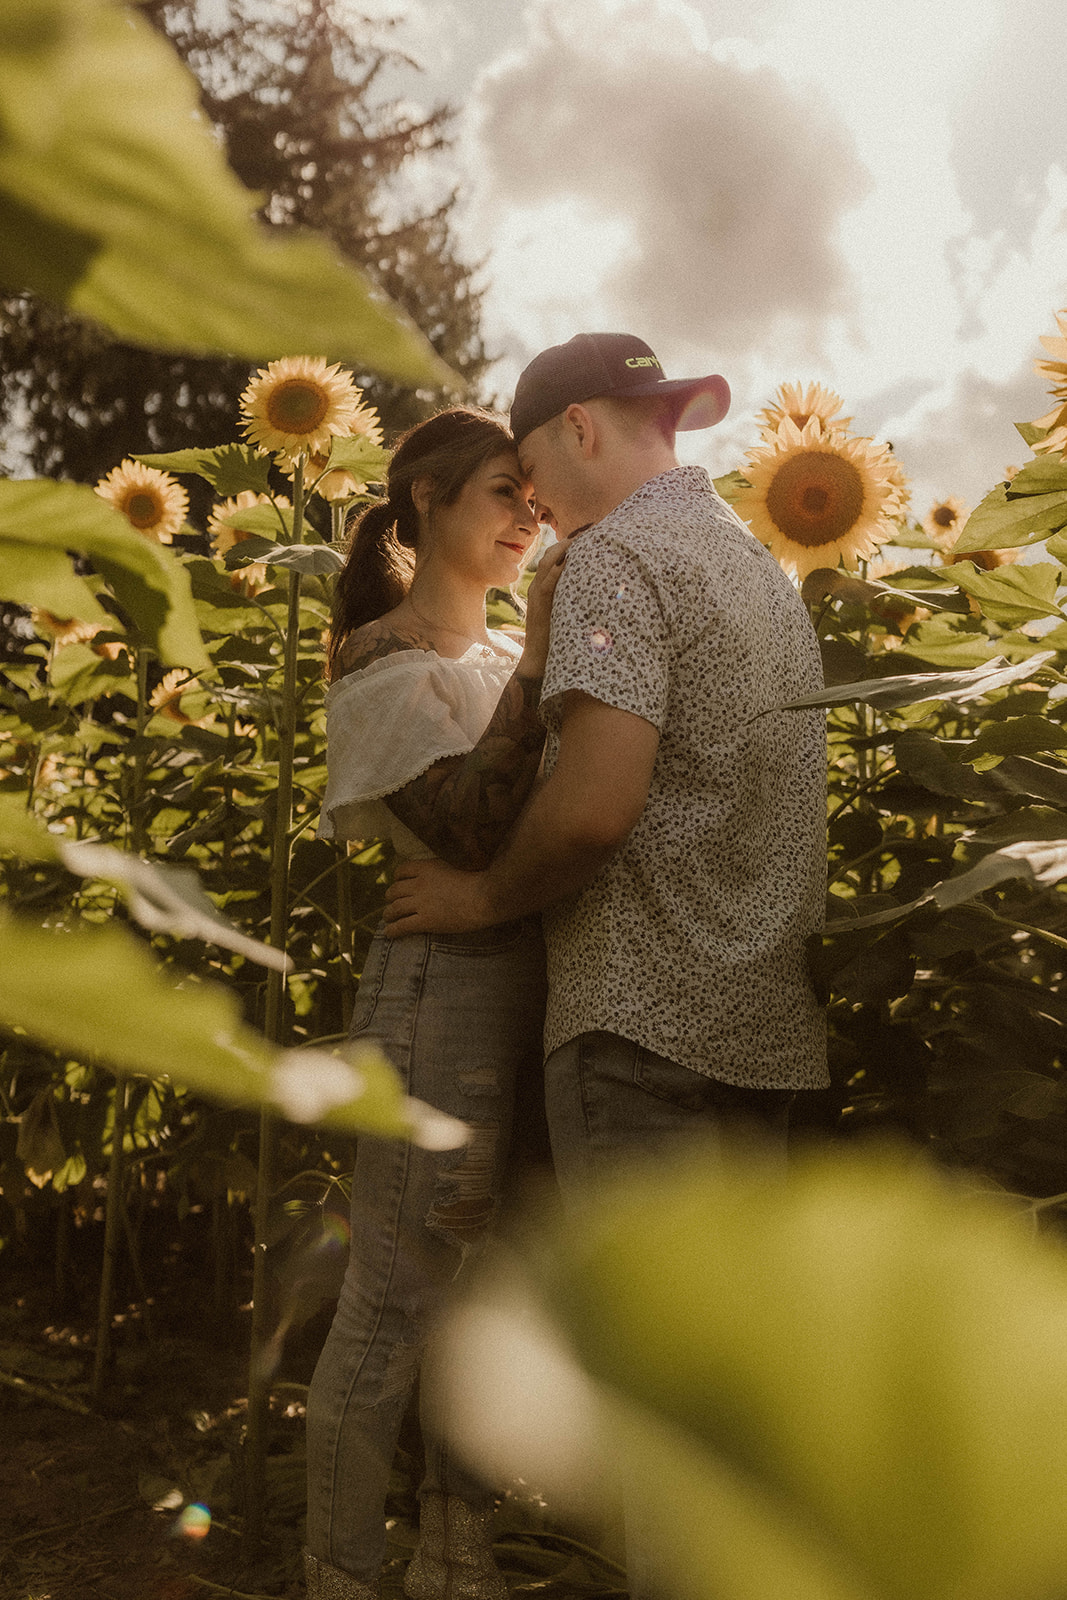 Intimate engagement photoshoot in a sunflower field.